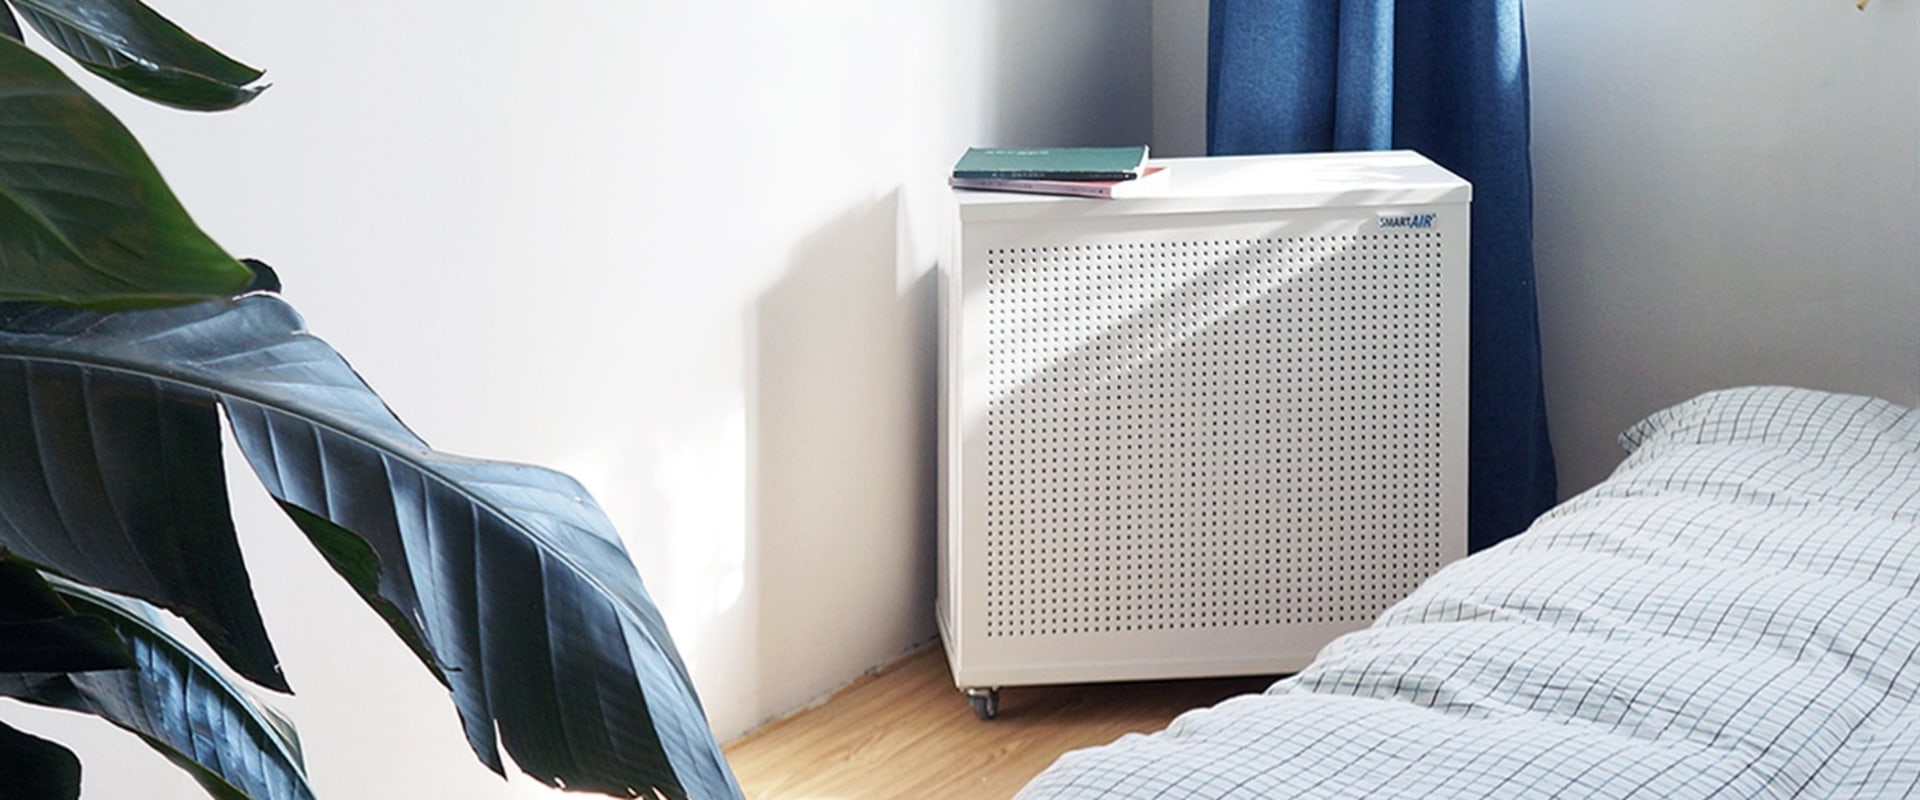 Can You Sleep Safely with an Air Purifier in Your Room?